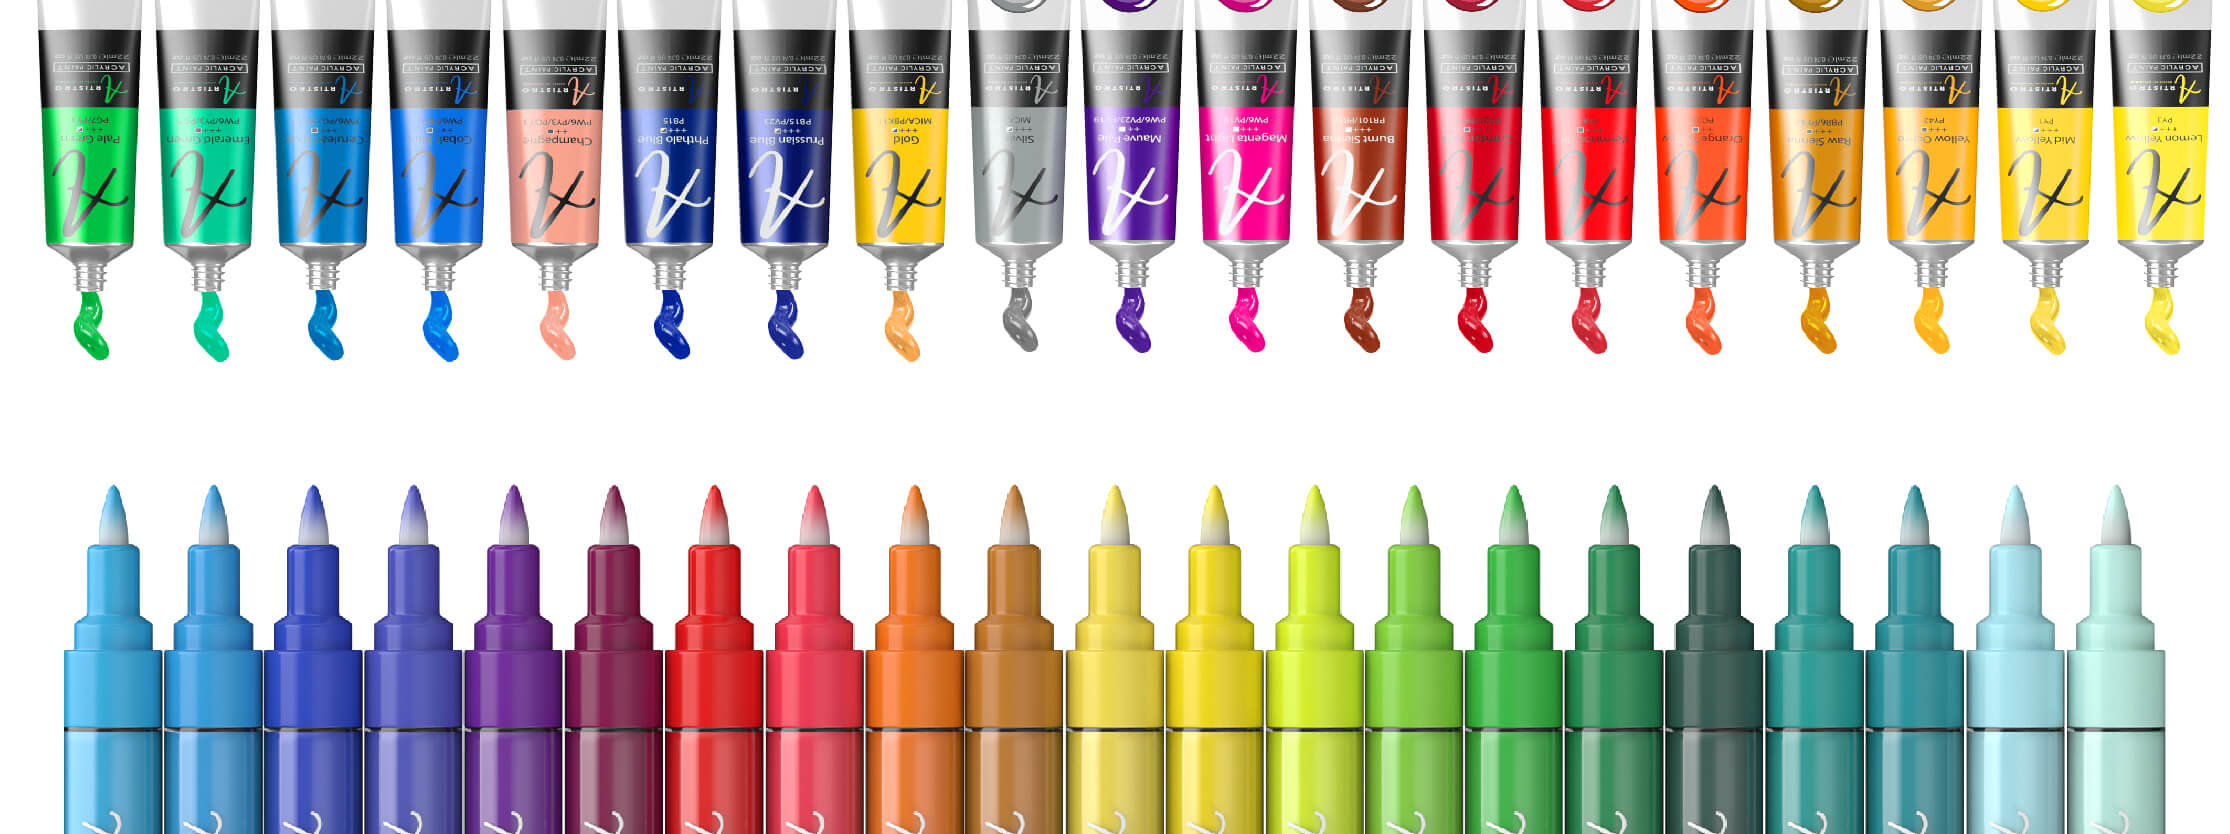 Art Supplies for Painting: Art Pens, Painting Markers & Best Art Supplies  for Professionals